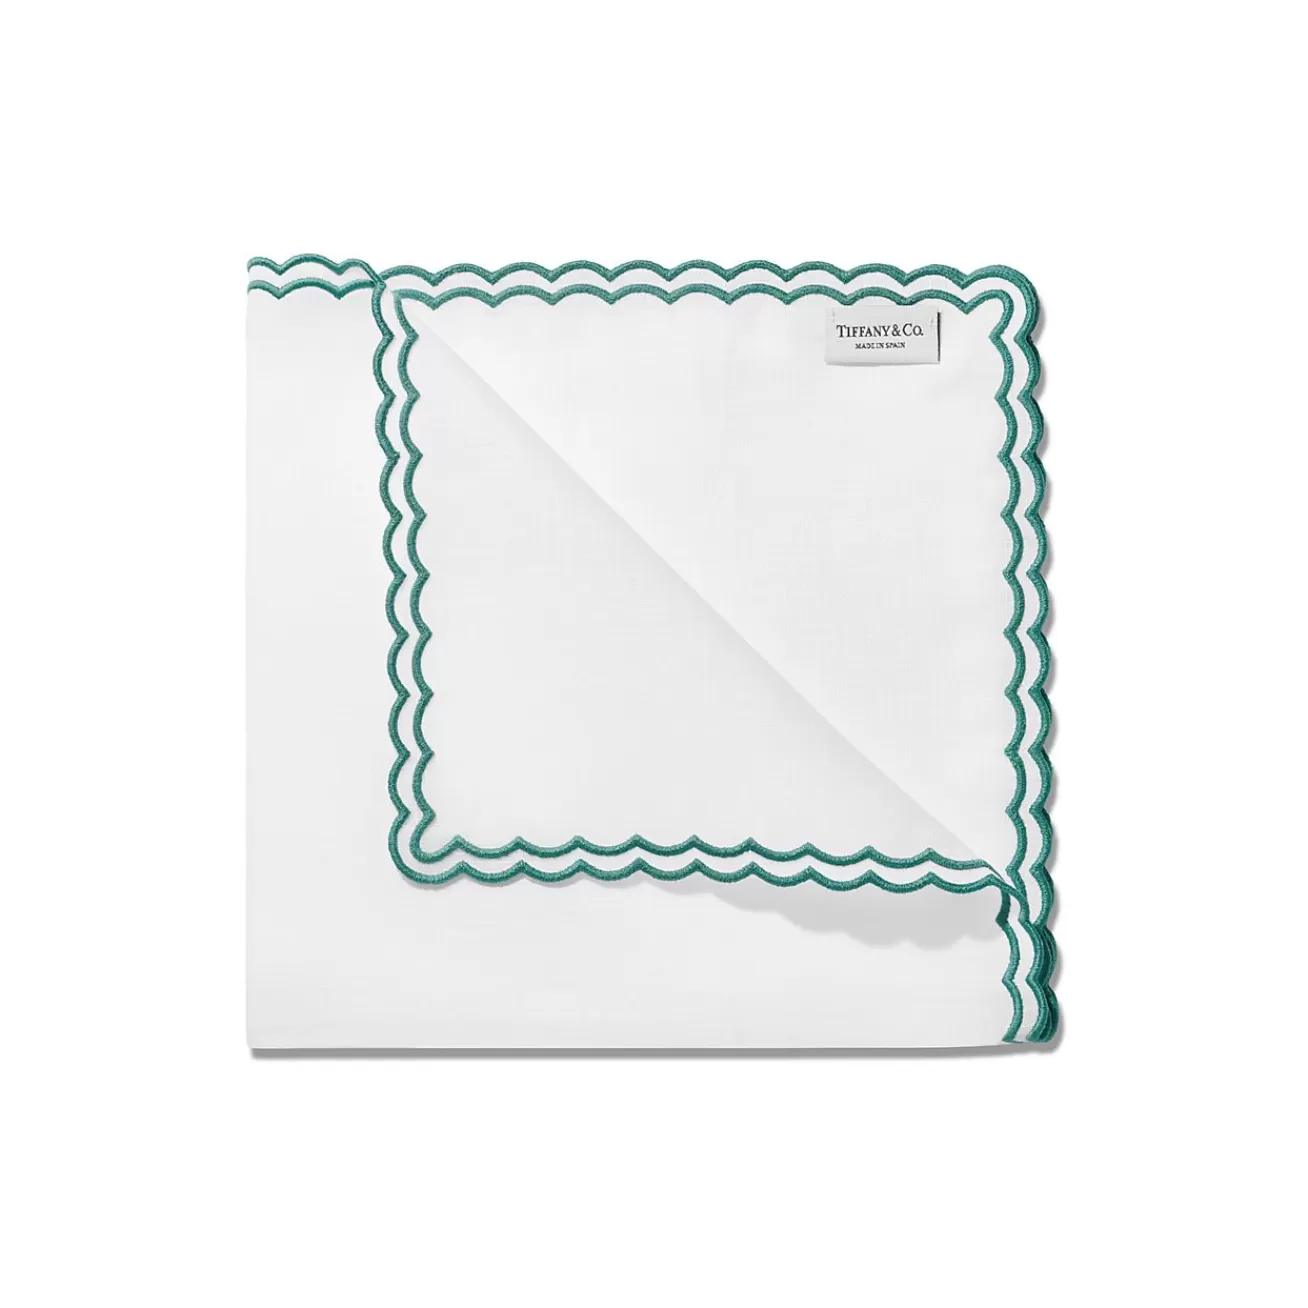 Tiffany & Co. Tiffany Home Essentials Scalloped Napkins in White Linen, Set of Four | ^ The Home | Housewarming Gifts